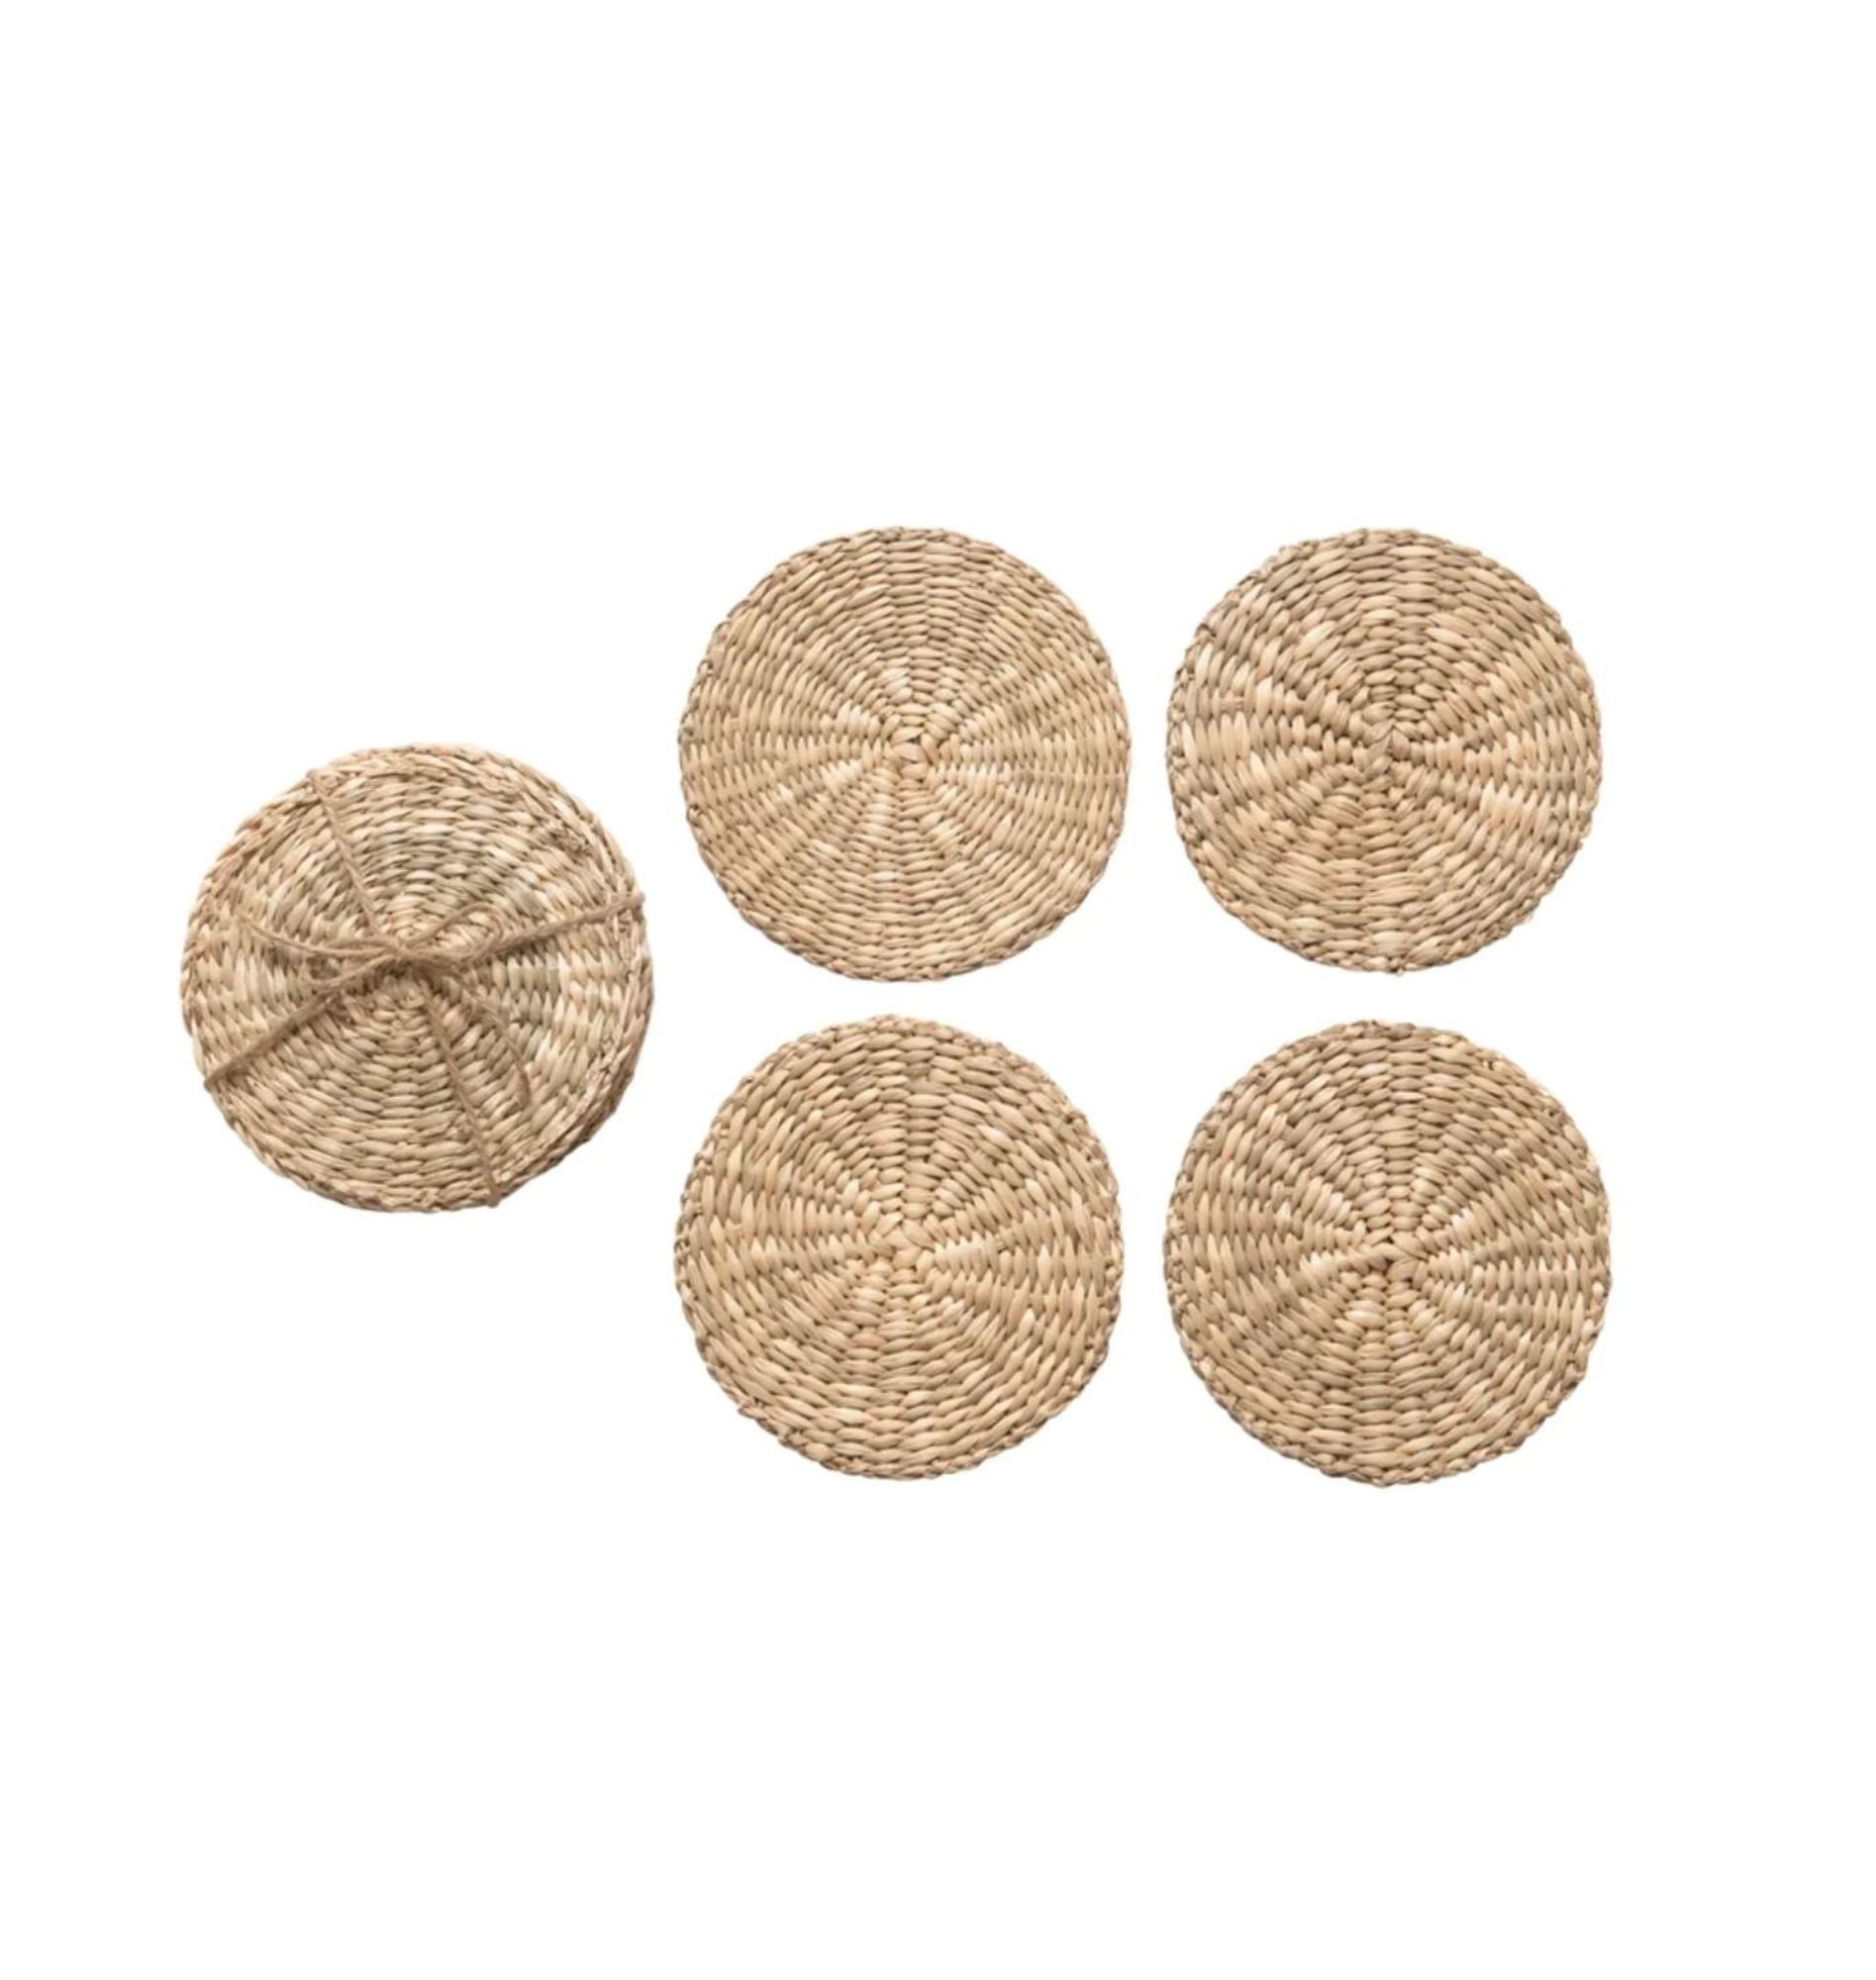 Hand Woven Seagrass Coasters, Set of 4